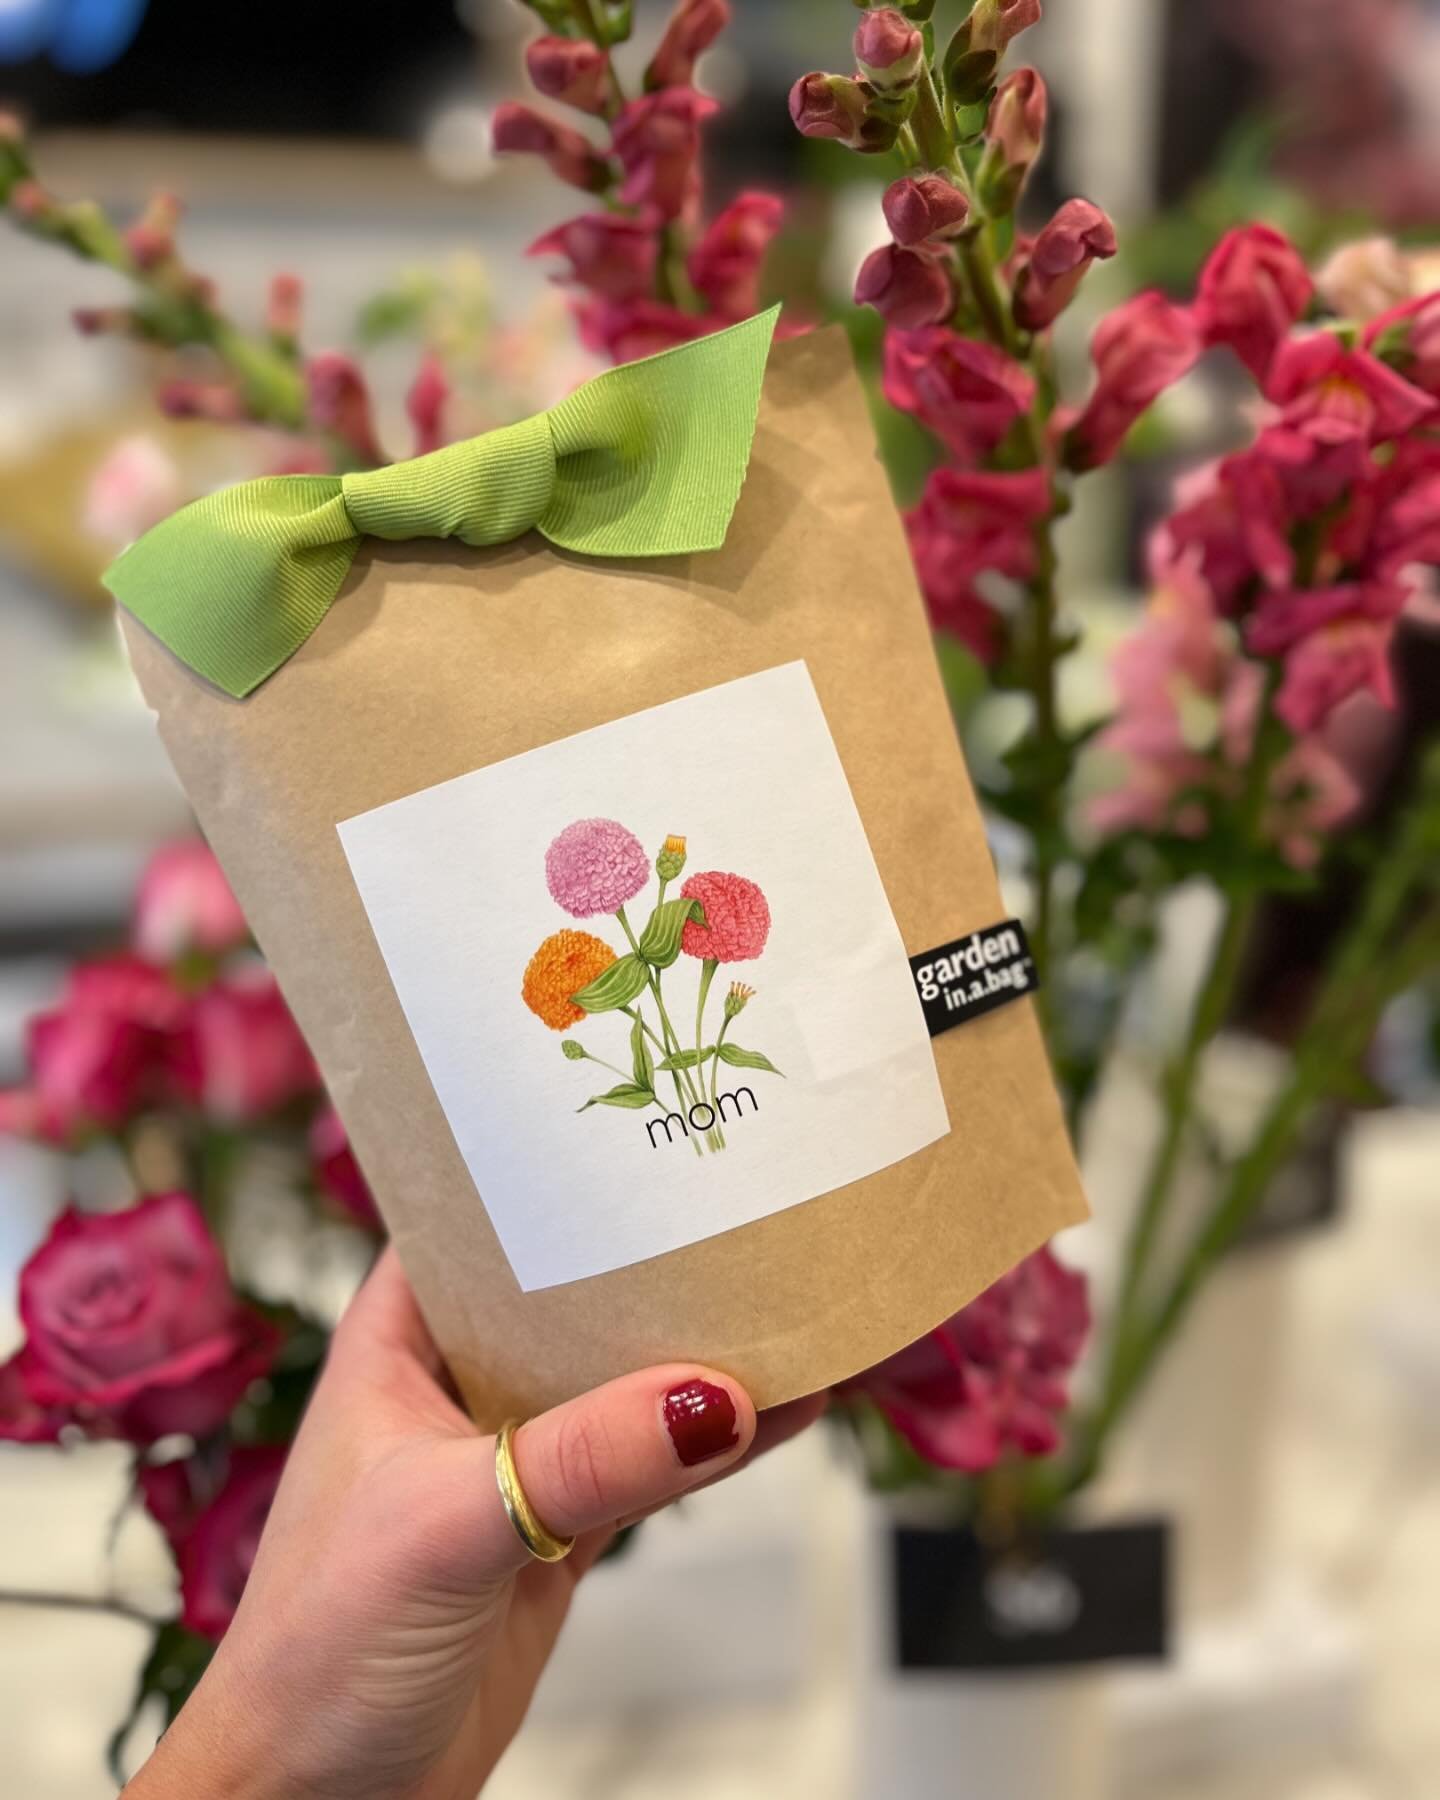 Mother&rsquo;s Day is this weekend ❕❕❕
this is your friendly reminder to order your mom flowers 🌷
+ drop by the shop to pick her up a cute gift 💝